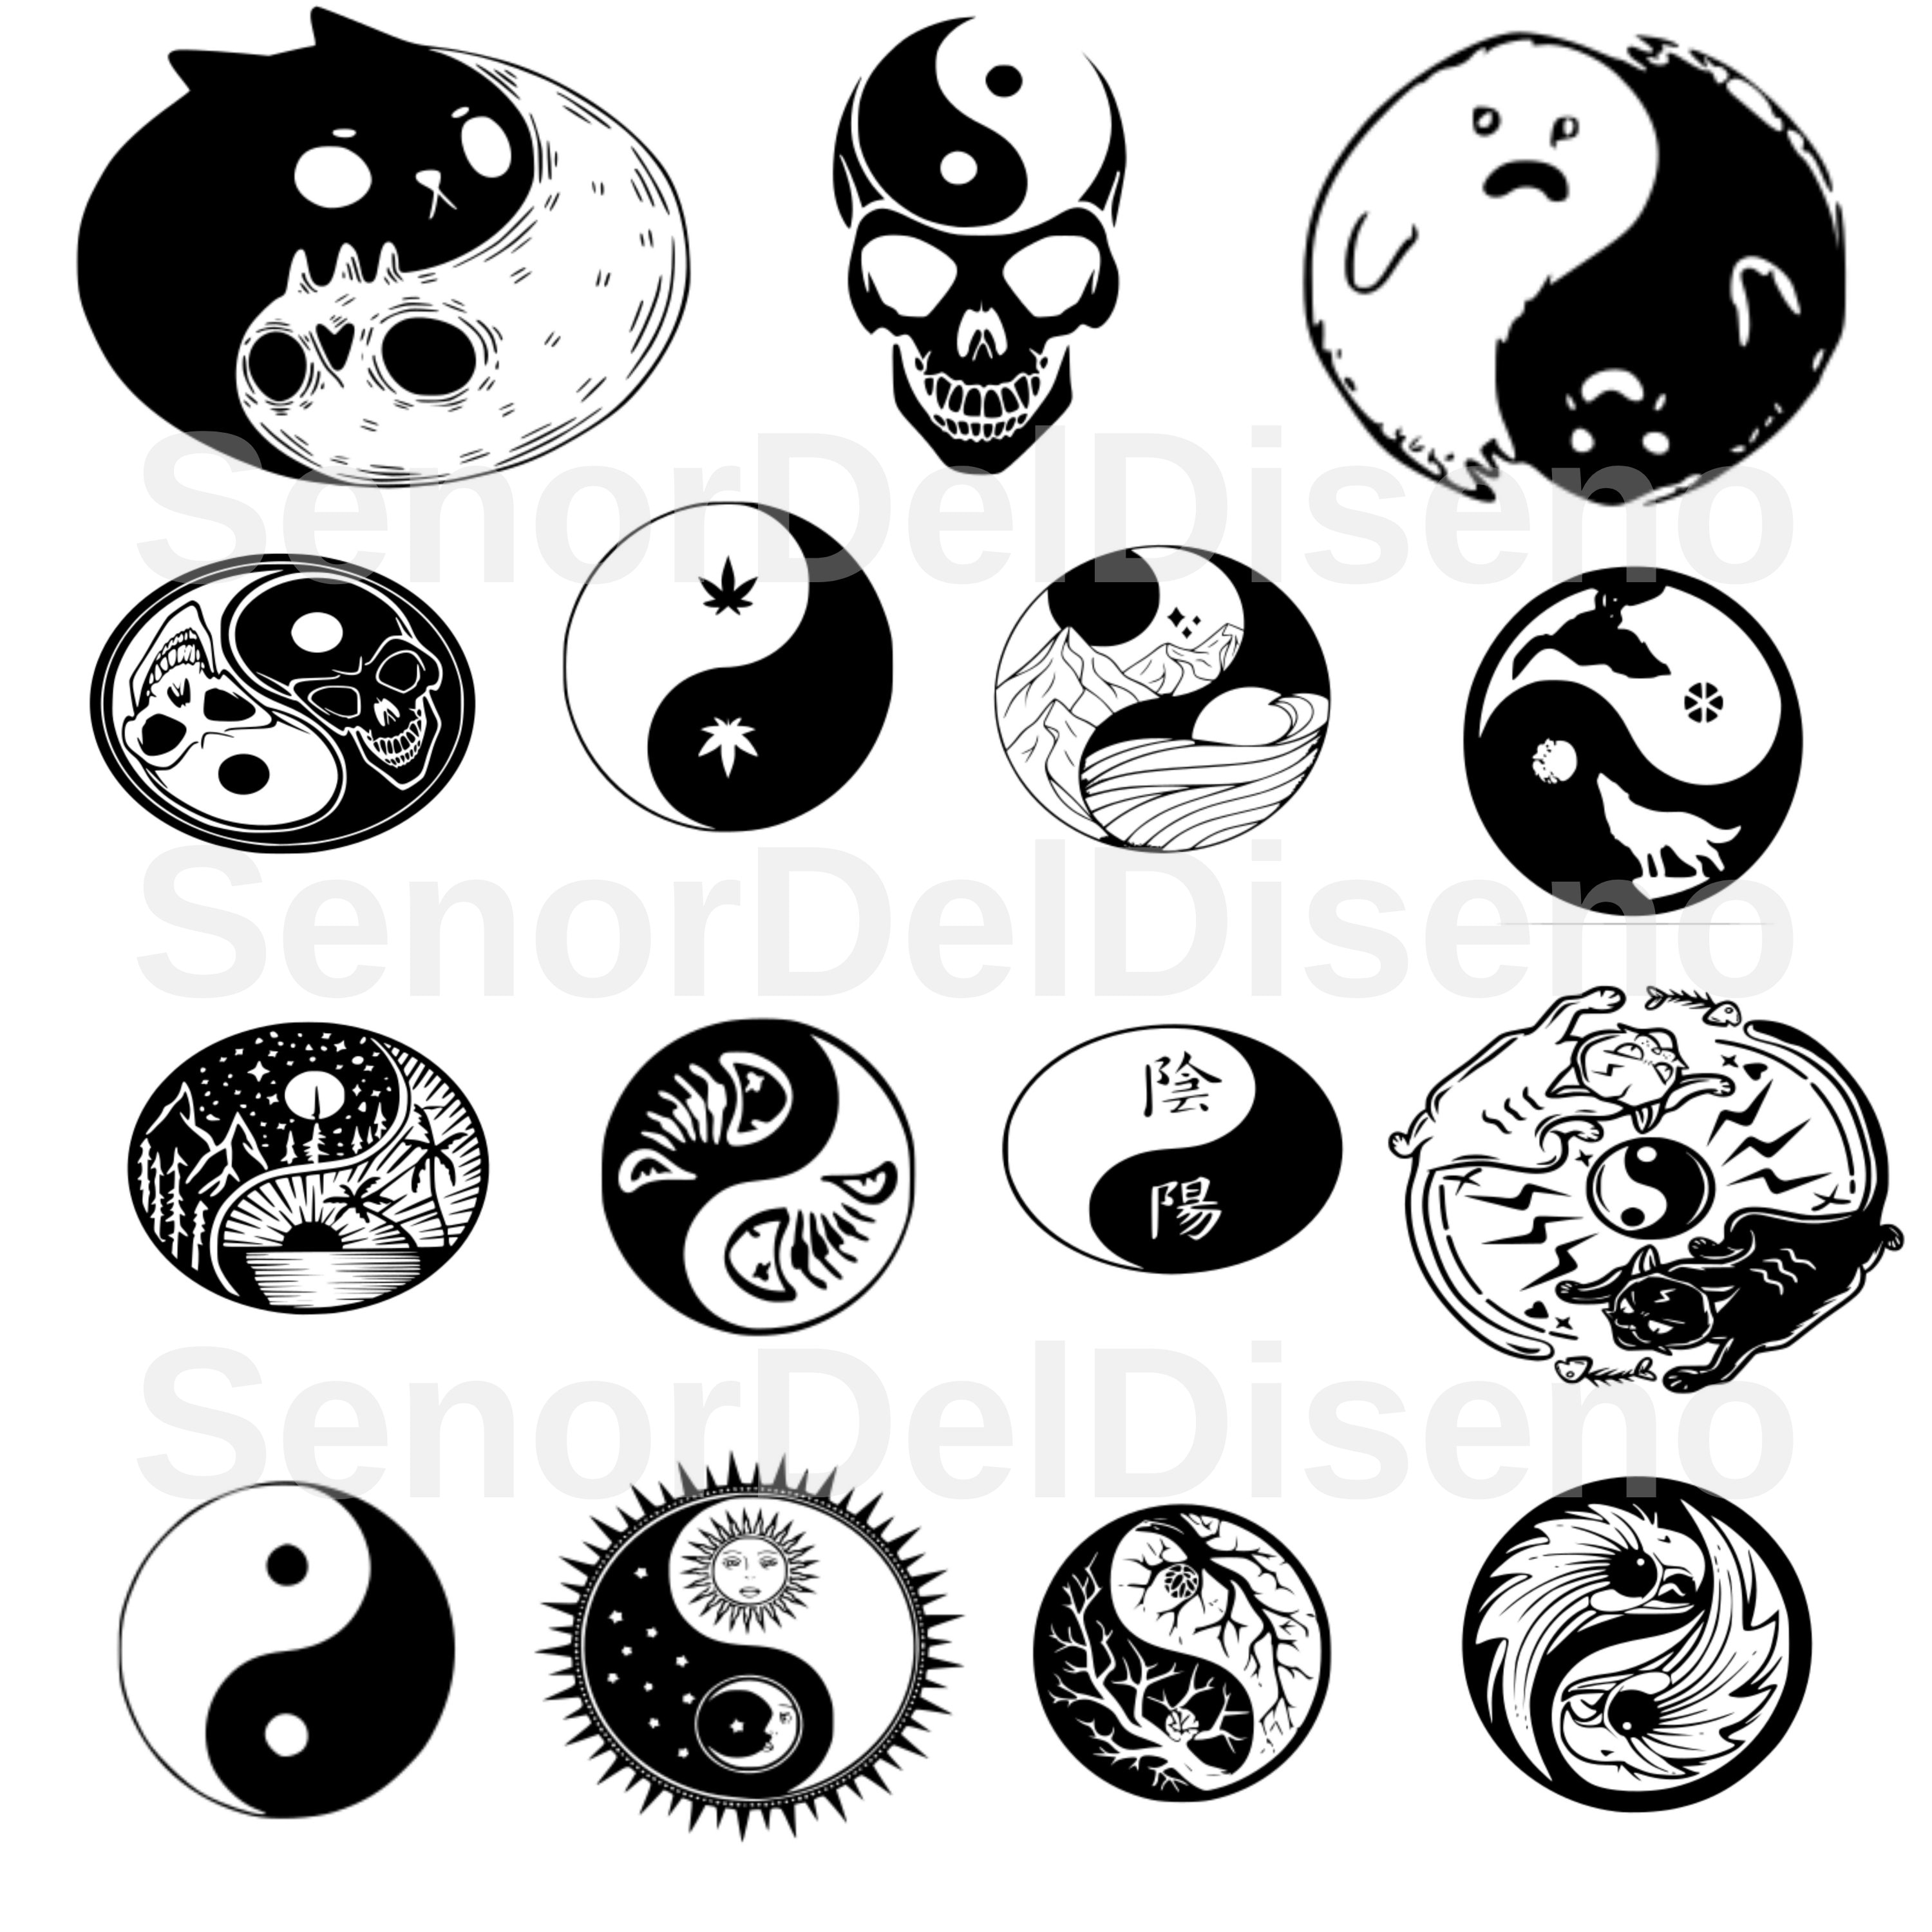 87 Chinese calligraphy ideas  chinese calligraphy, chinese symbols,  chinese symbol tattoos